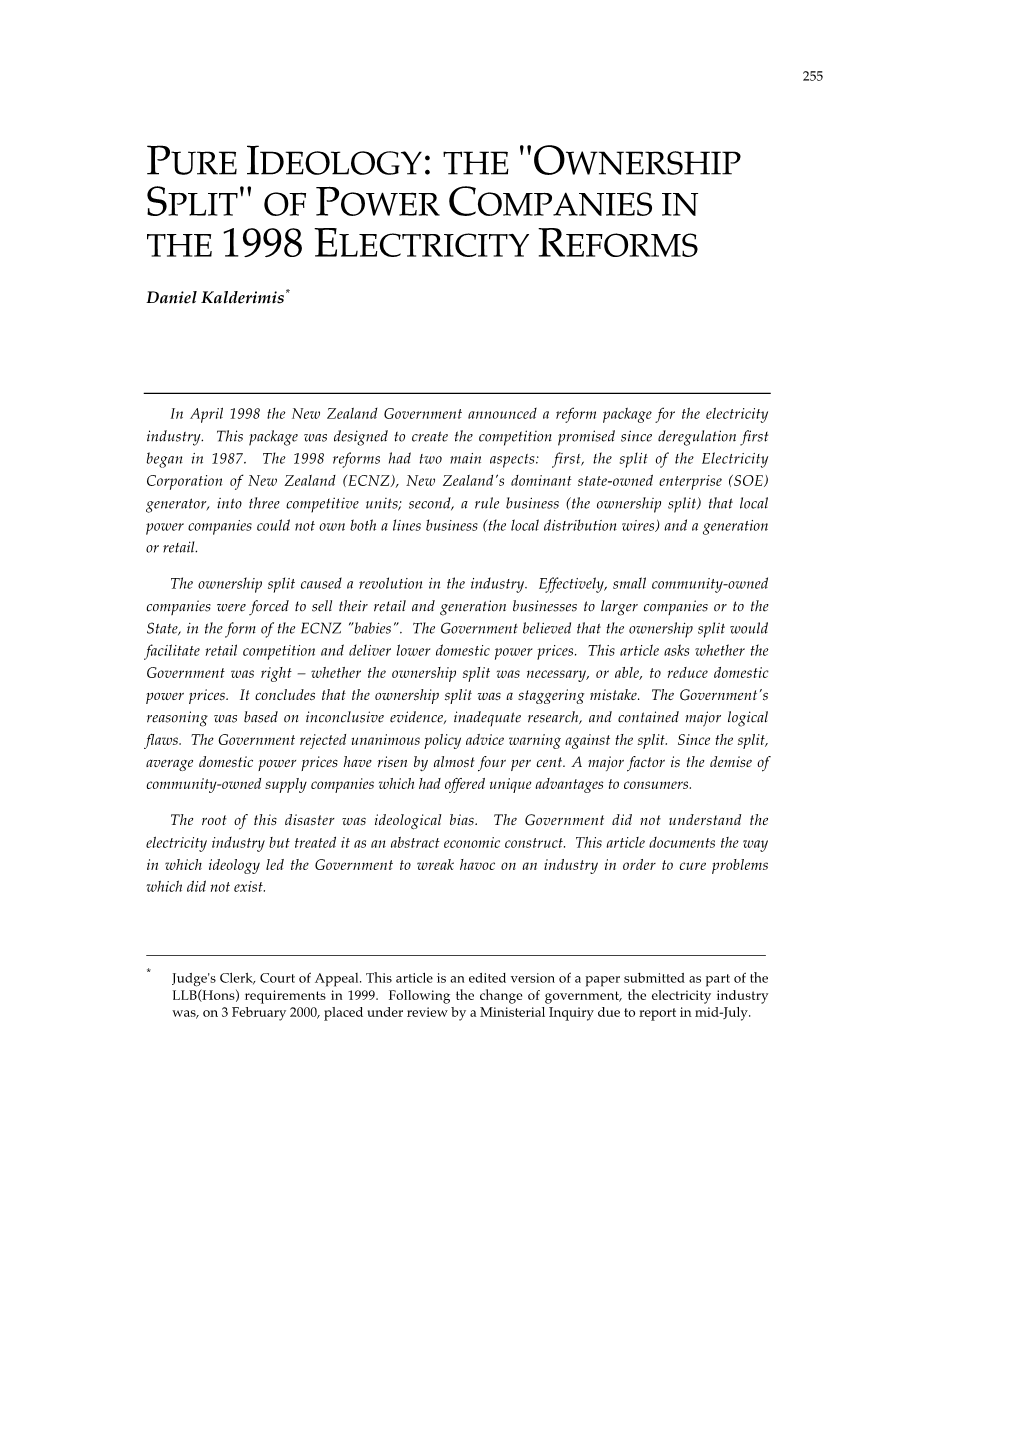 Of Power Companies in the 1998 Electricity Reforms